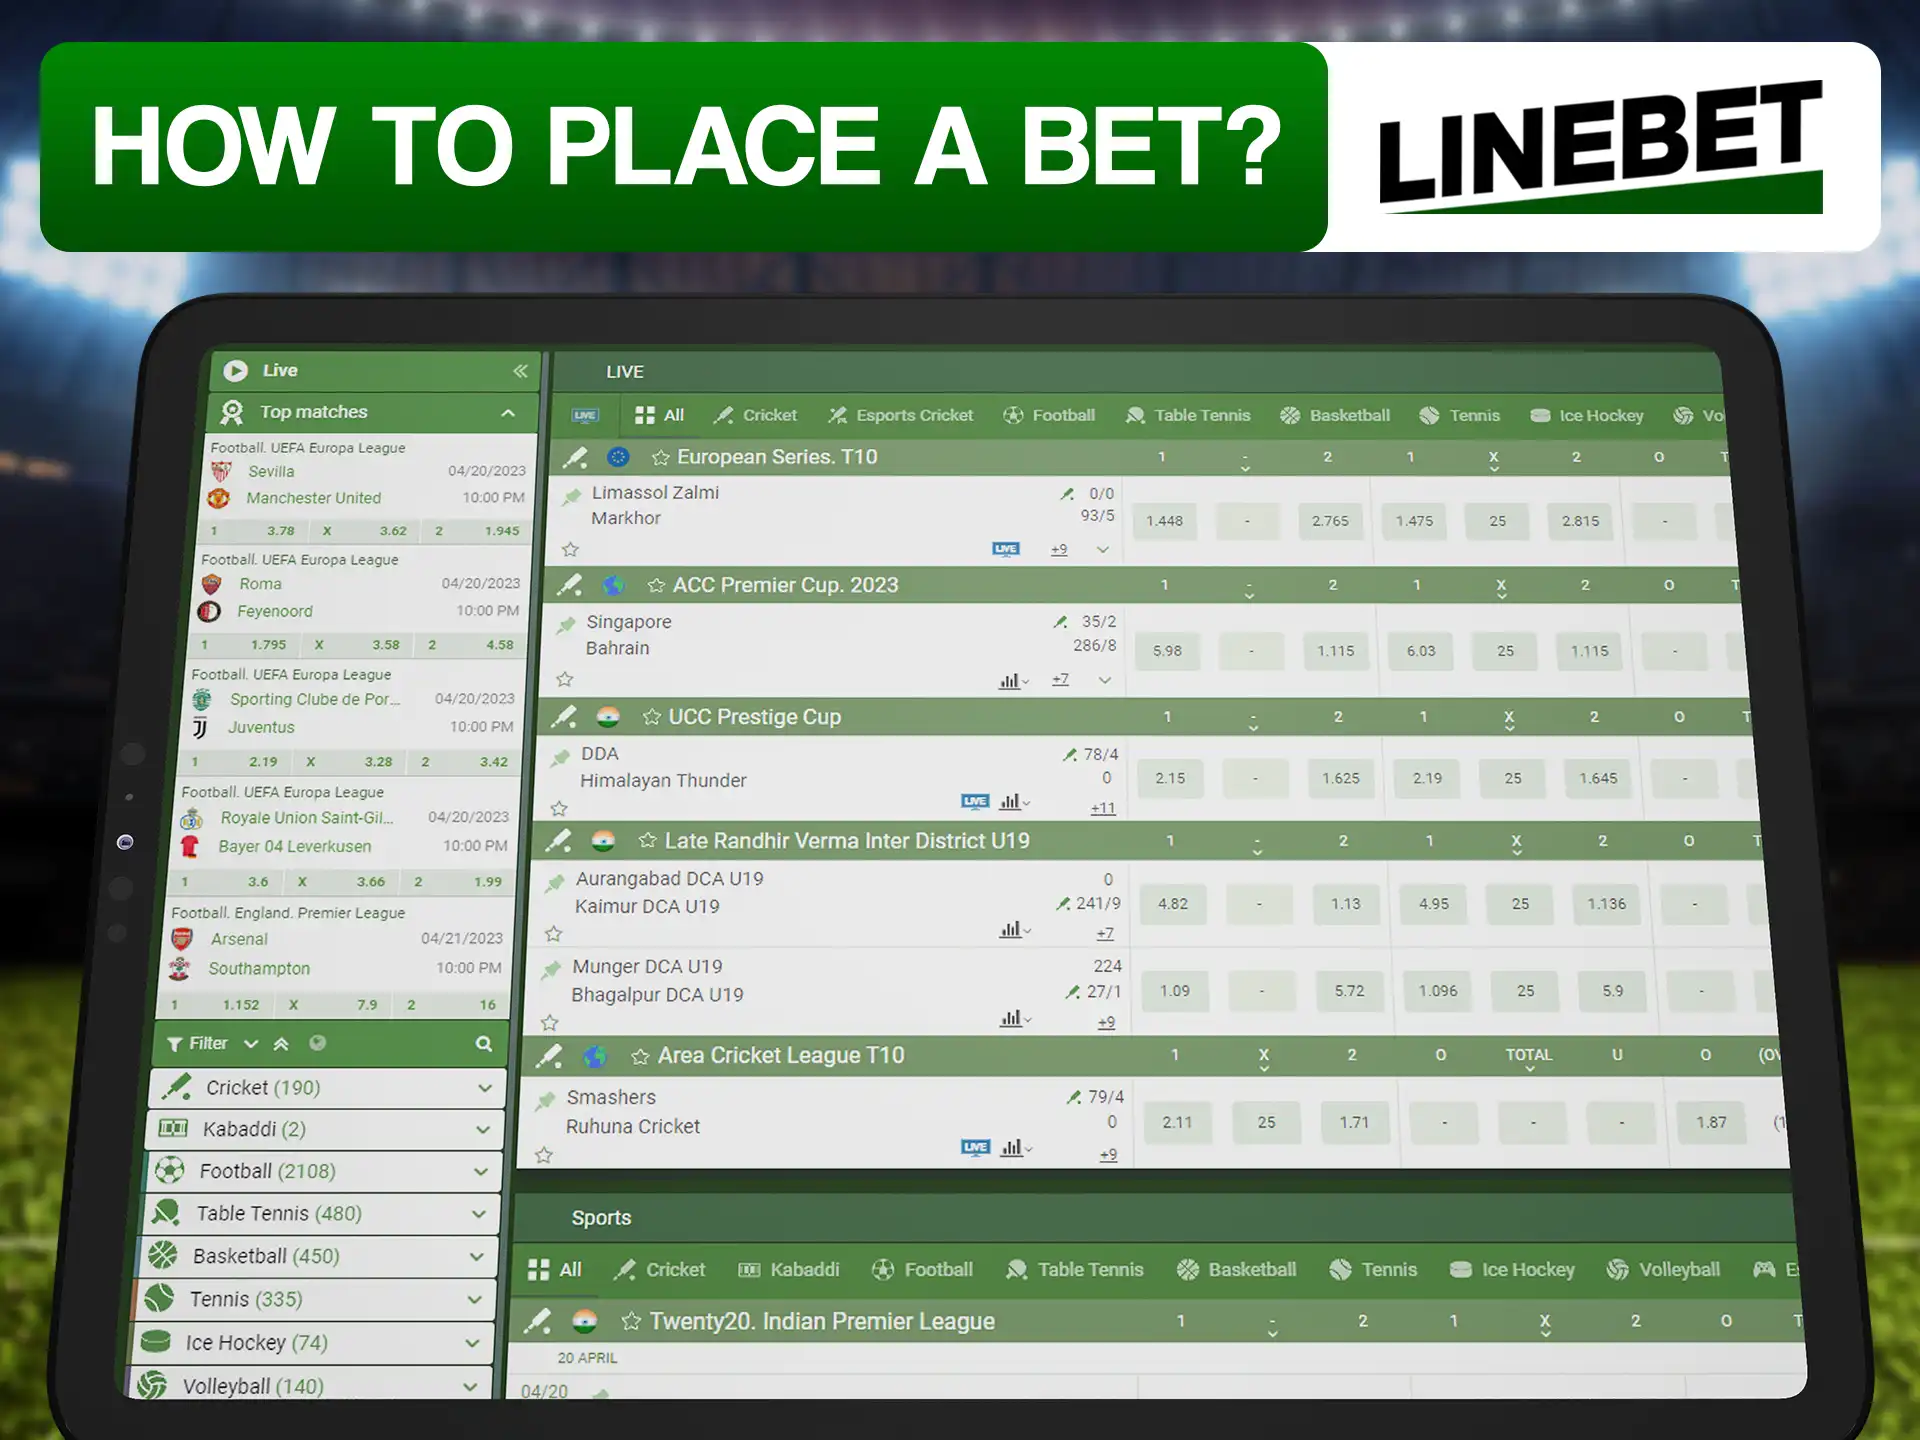 It's easy to place bets at Linebet.